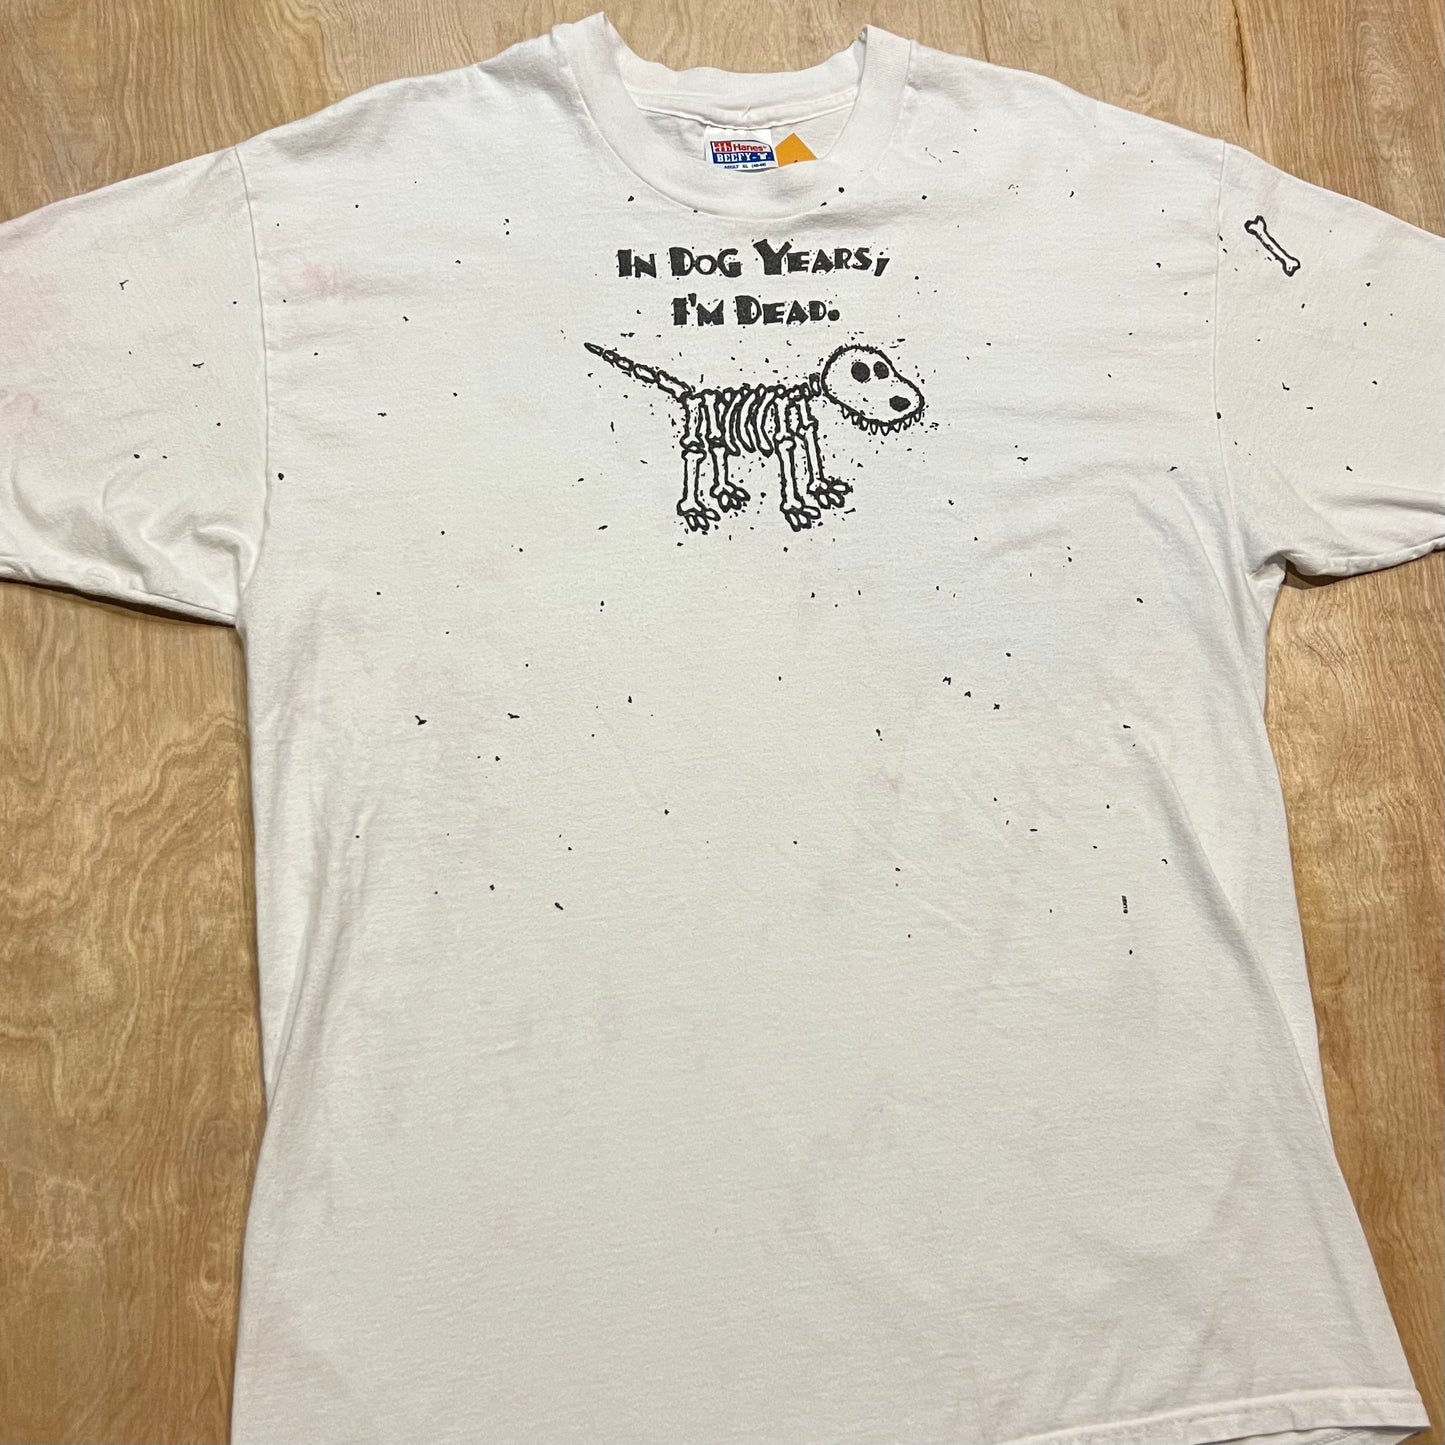 Vintage "In Dog Years I'm Dead" Single Stitch T-Shirt